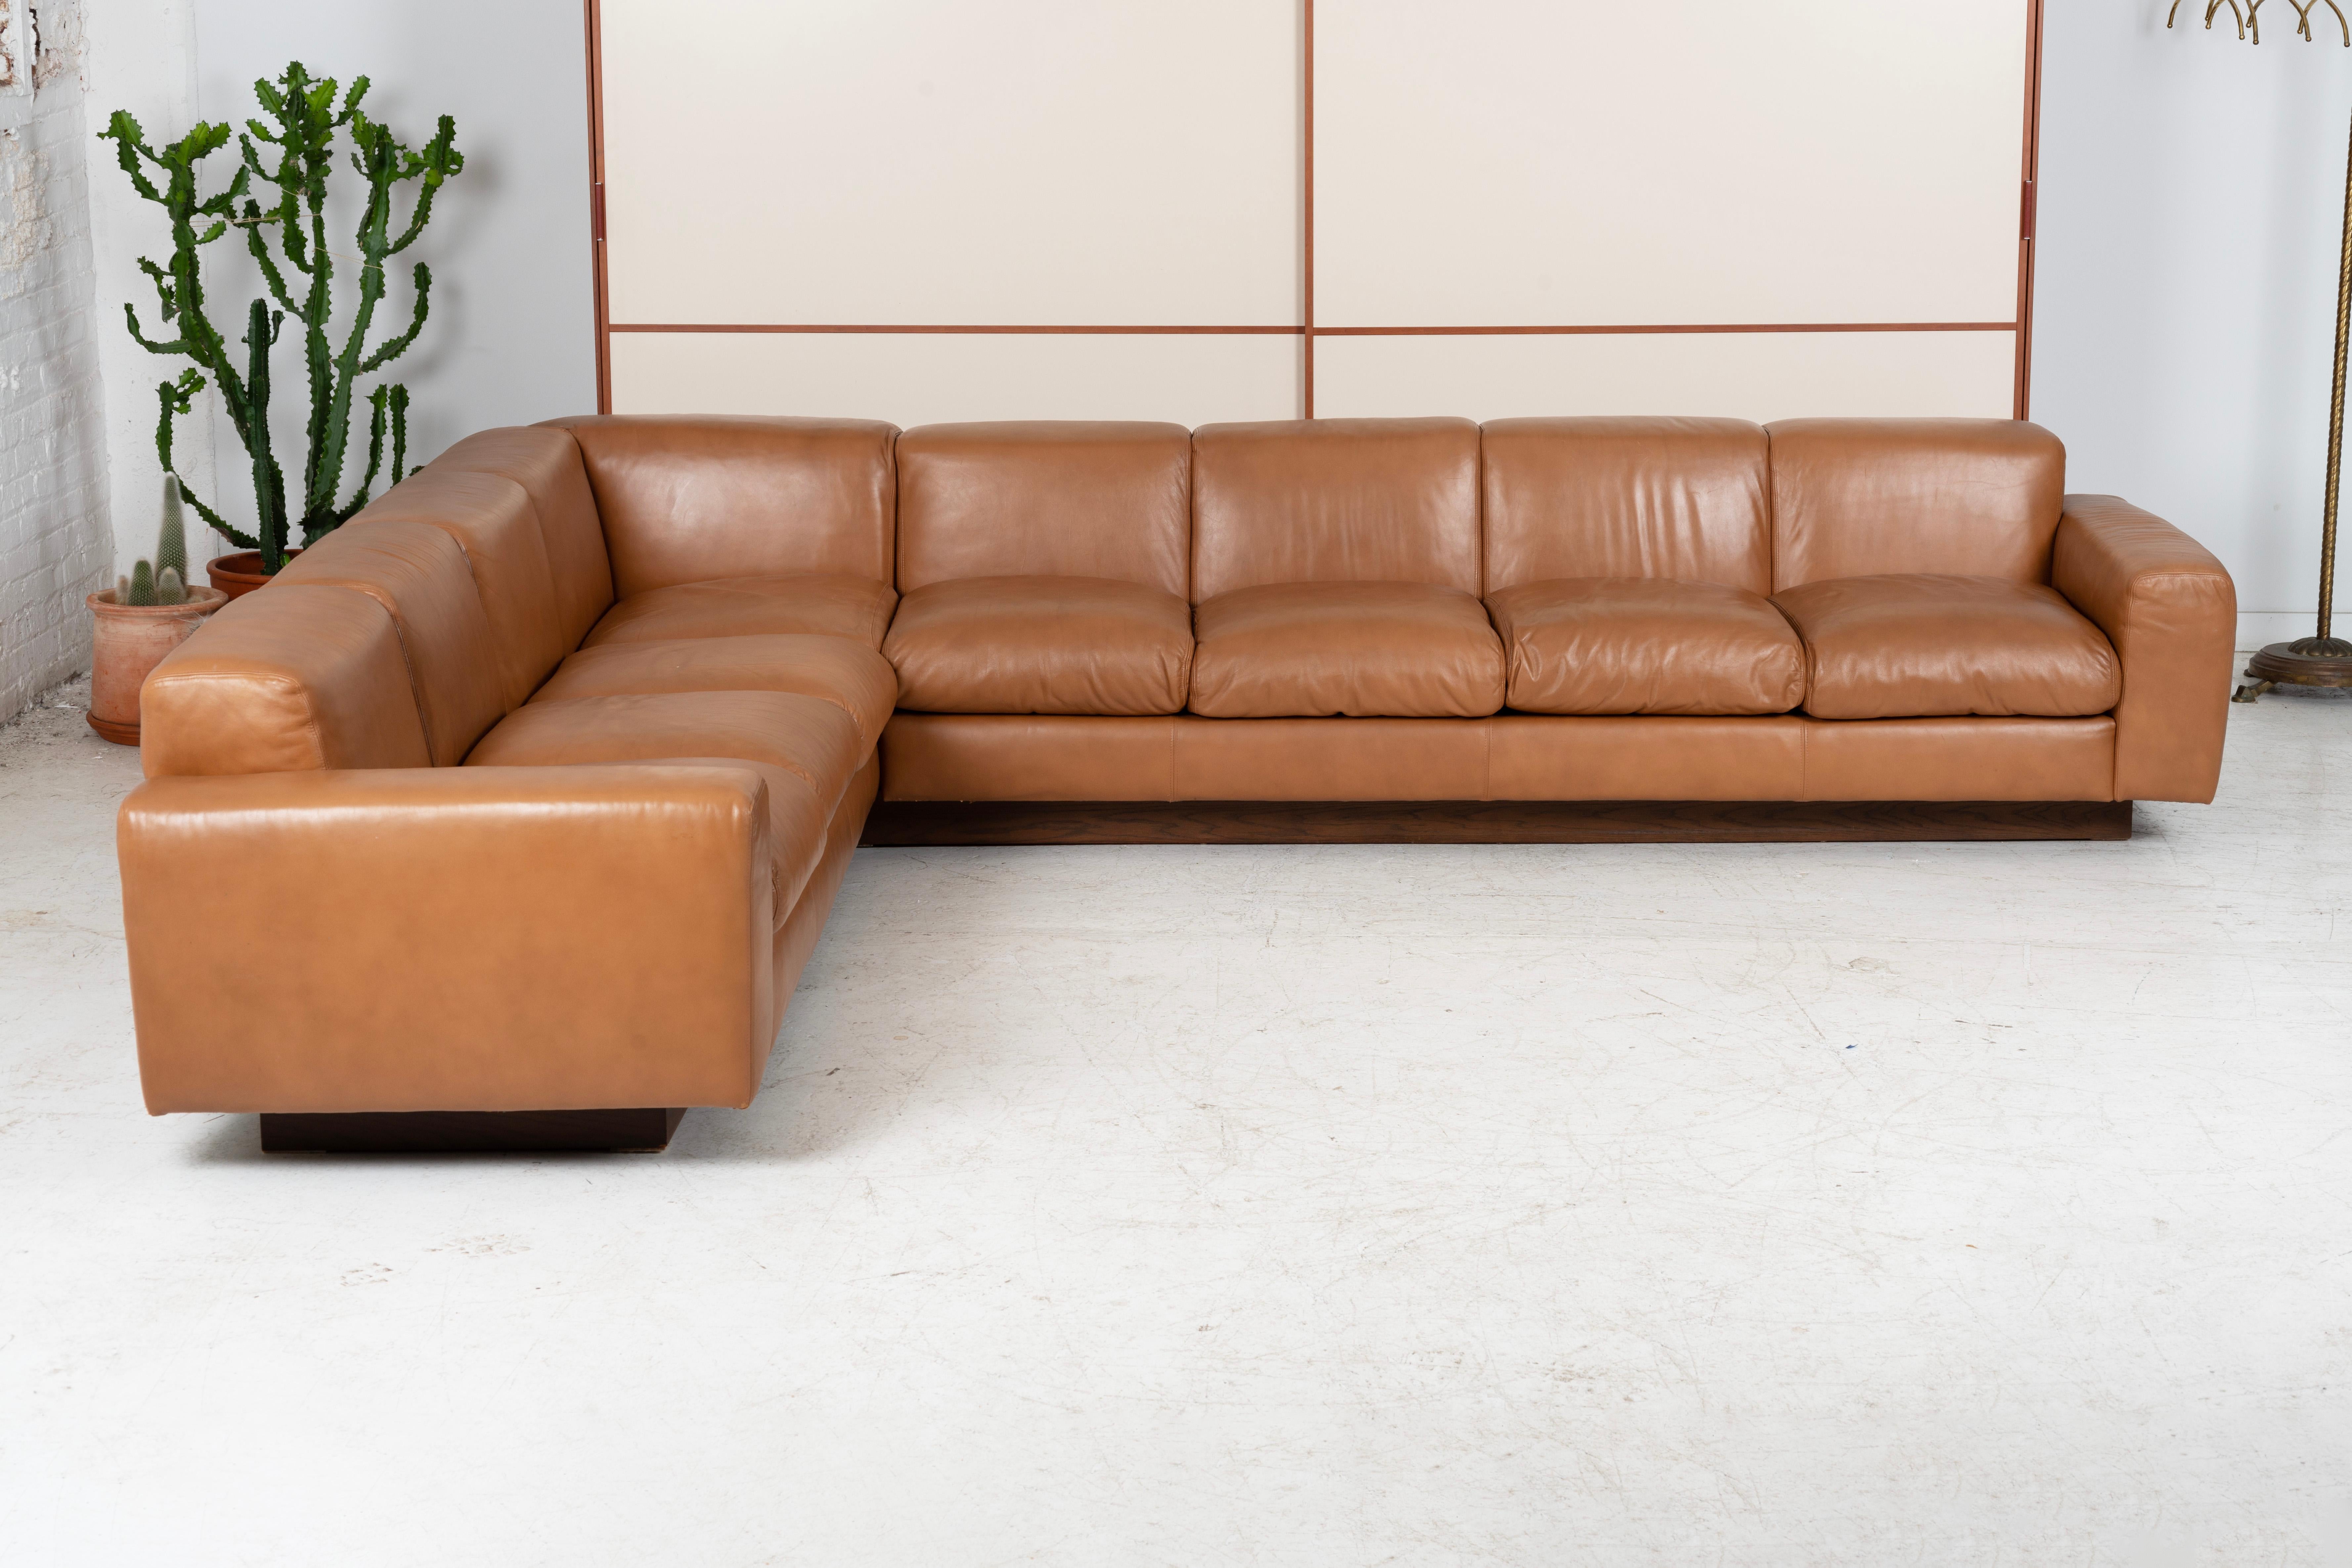 Custom built leather sectional in the 1970's for a home in Chicago. Sofa sits on a connecting walnut plinth base. Leather is in excellent original vintage condition. Seats up to 7. Settee and ottoman are sold and not included in the set.

H: